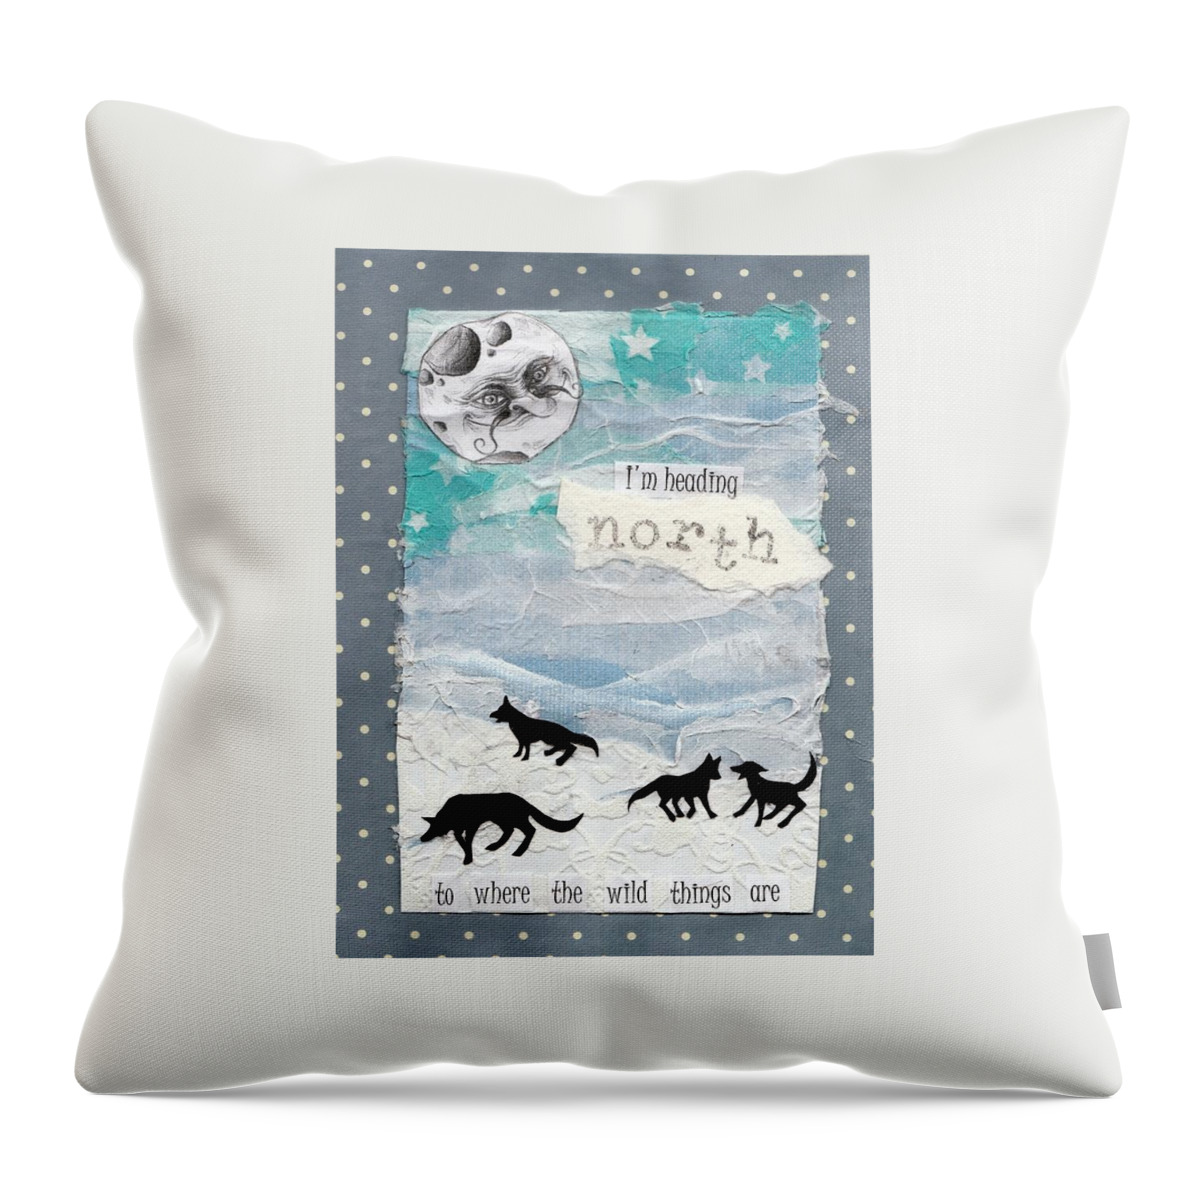 Holly Brook Illustration Moon Wolf Snow Ice Collage Throw Pillow featuring the mixed media Heading North by Sylvie Boersma